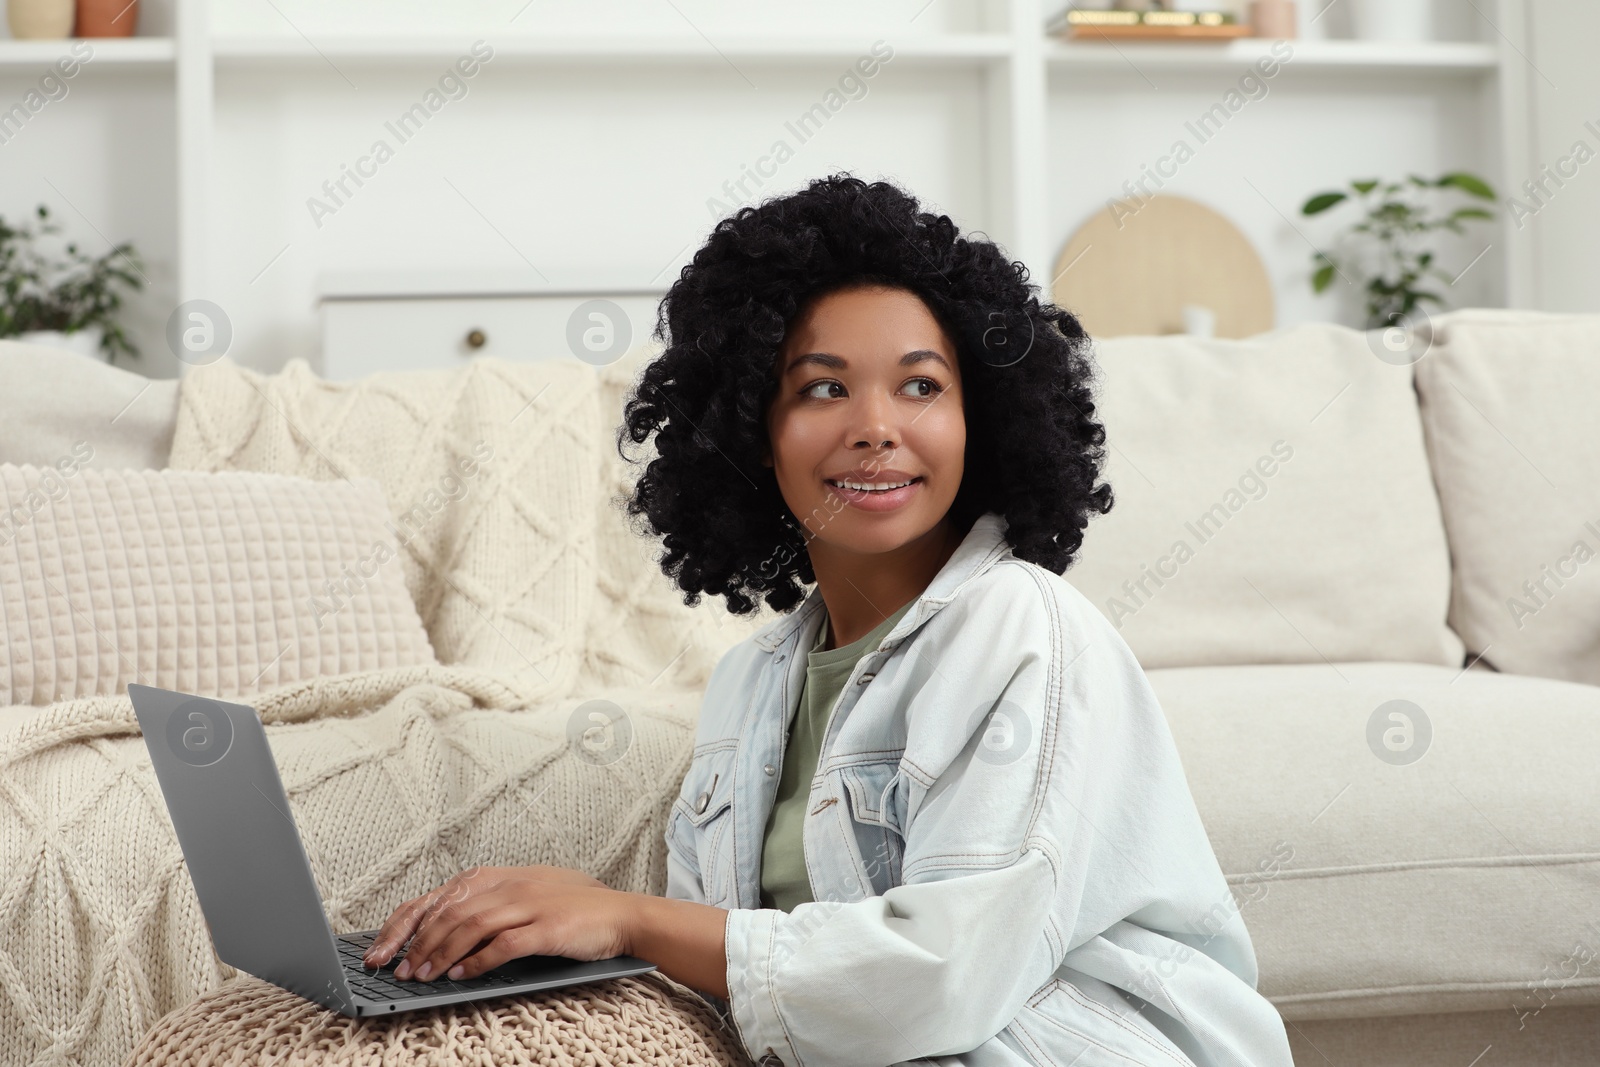 Photo of Happy young woman using laptop on pouf at home